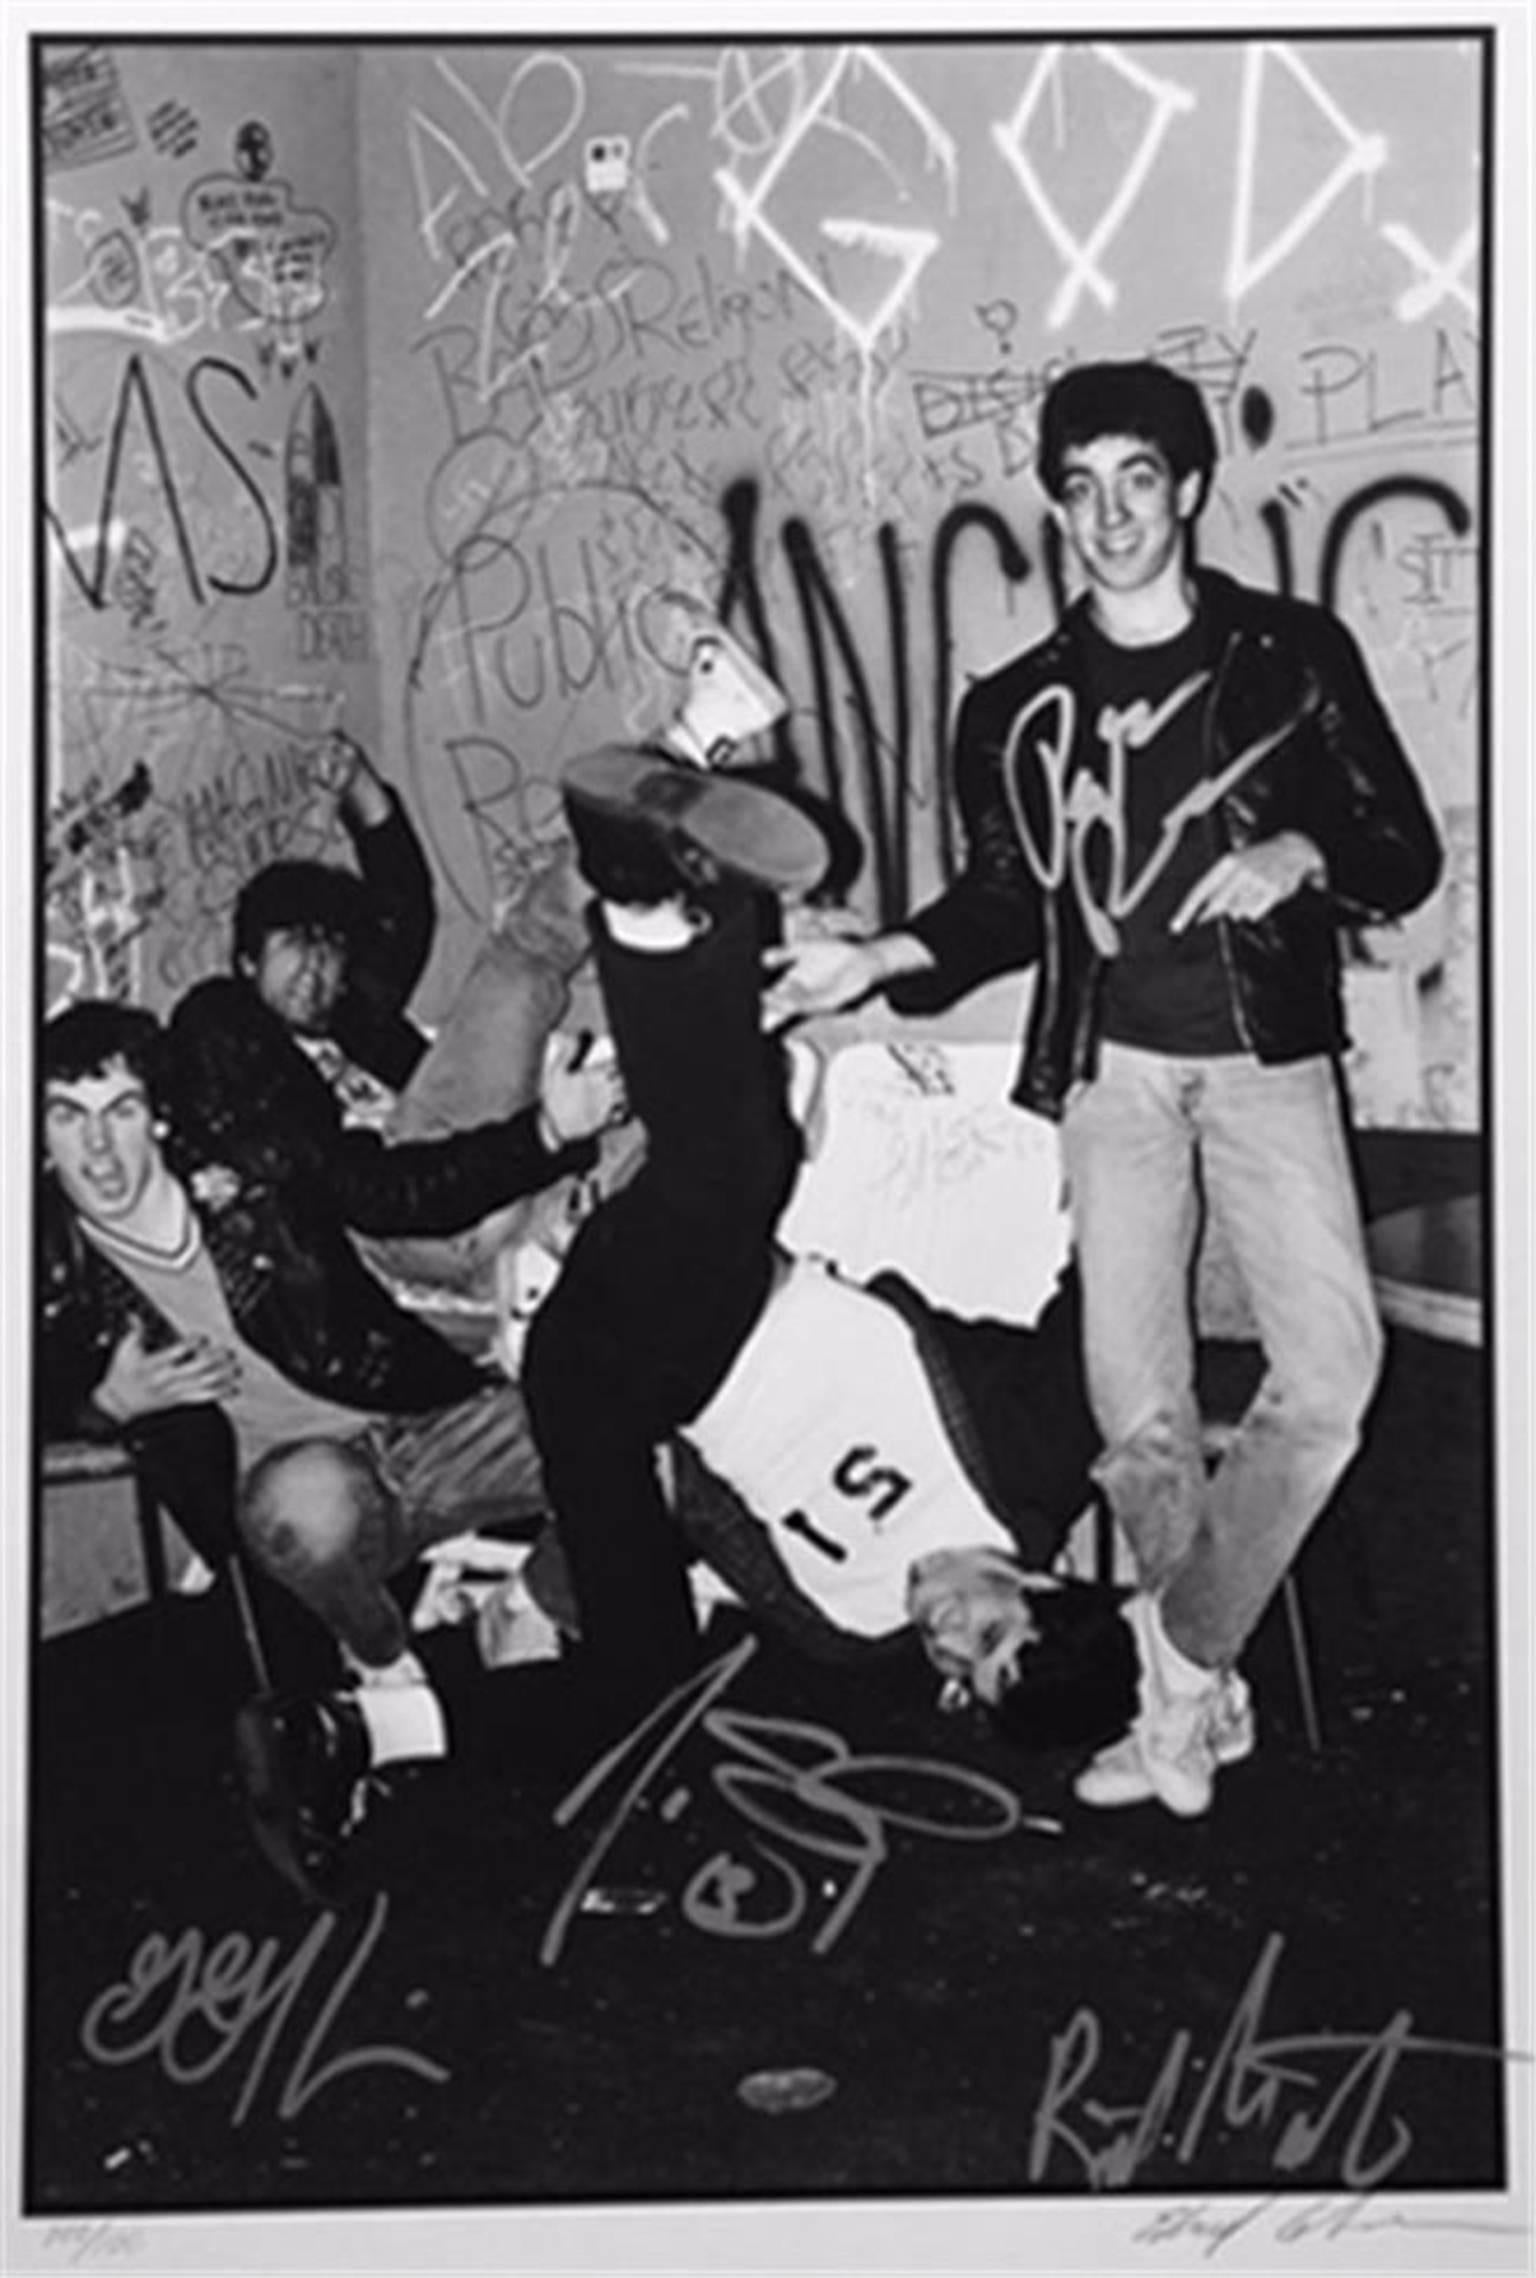 Edward Colver Black and White Photograph - Bad Religion (hand-signed 3)